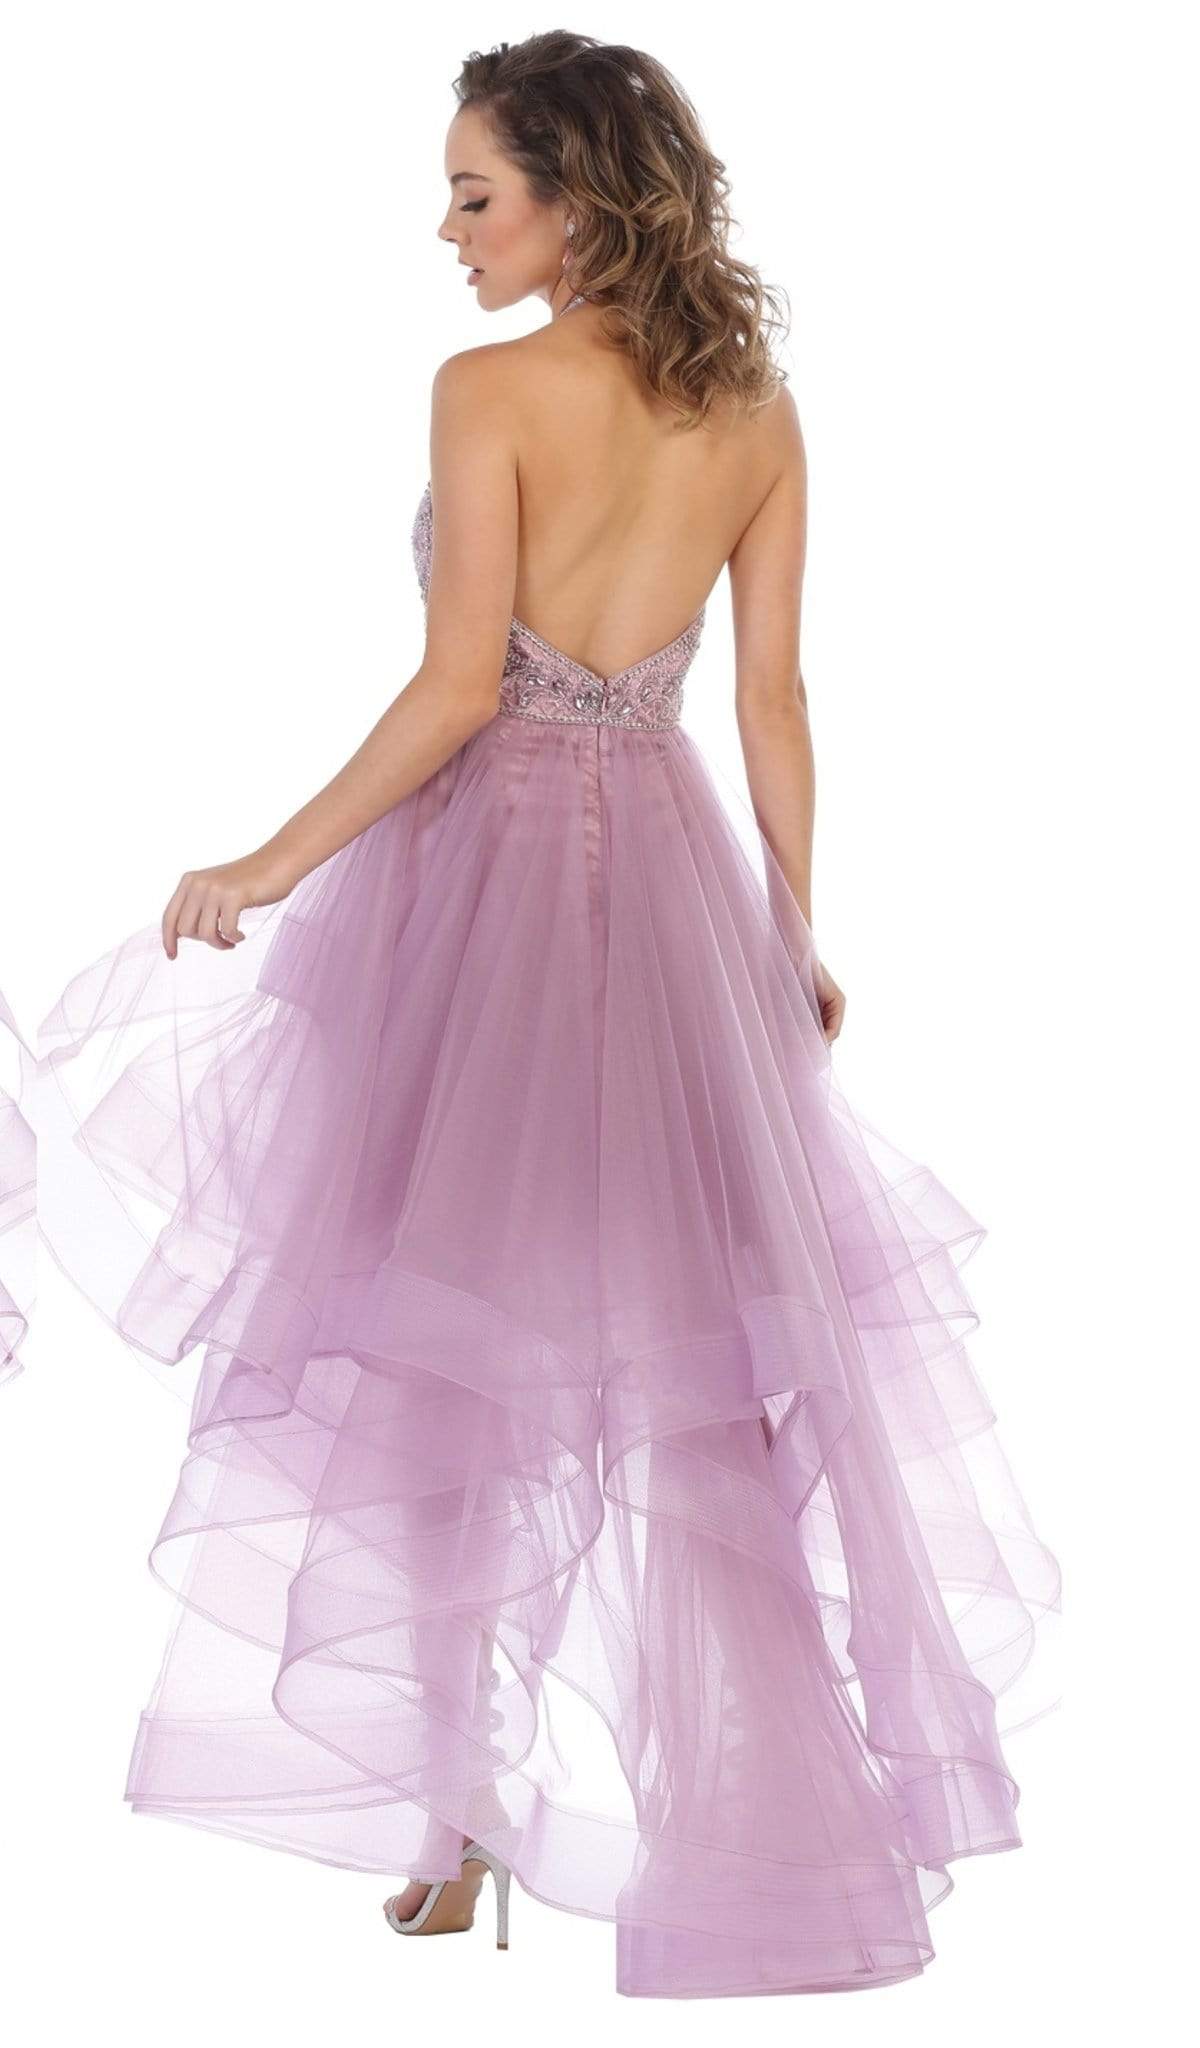 May Queen - RQ7717 Jeweled Illusion Halter High Low Gown Special Occasion Dress